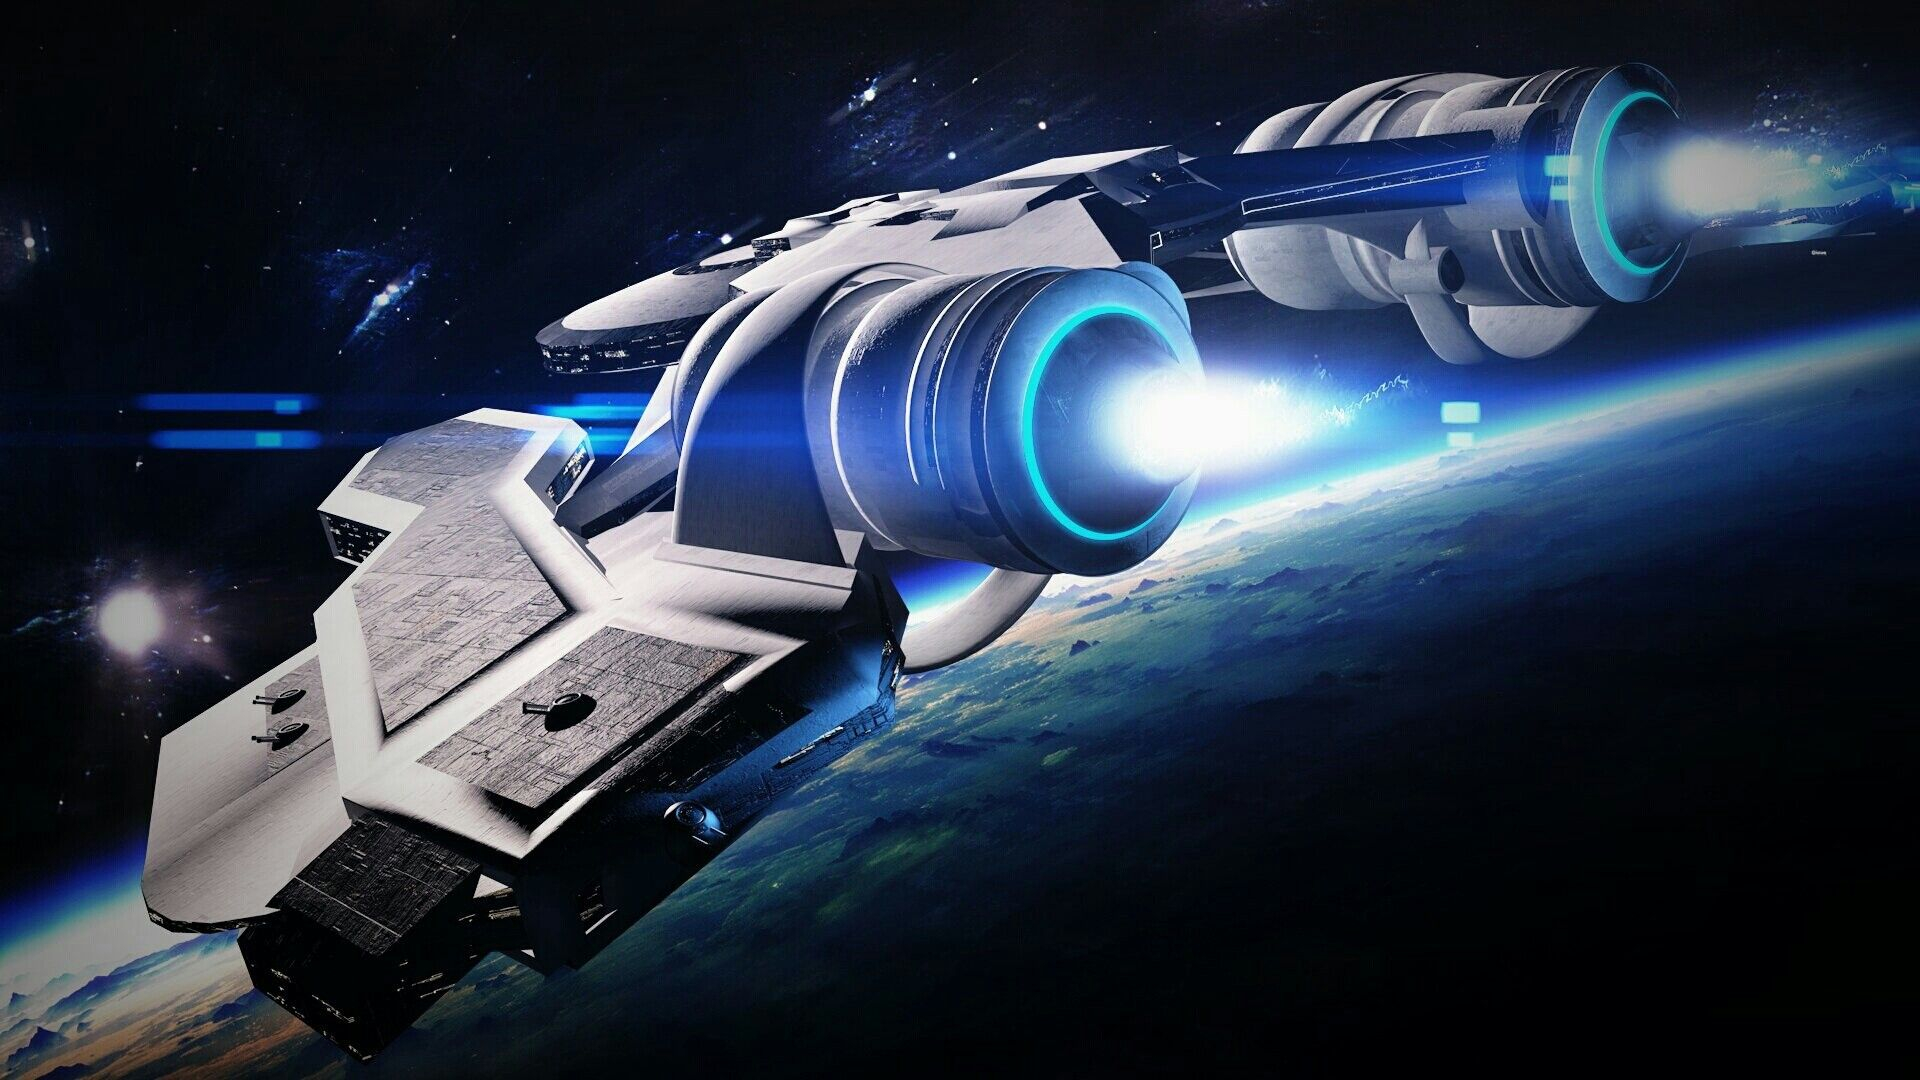 1920x1080 Amazing Spaceship Wallpaper | Space and astronomy, Other galaxies, Hd wallpaper